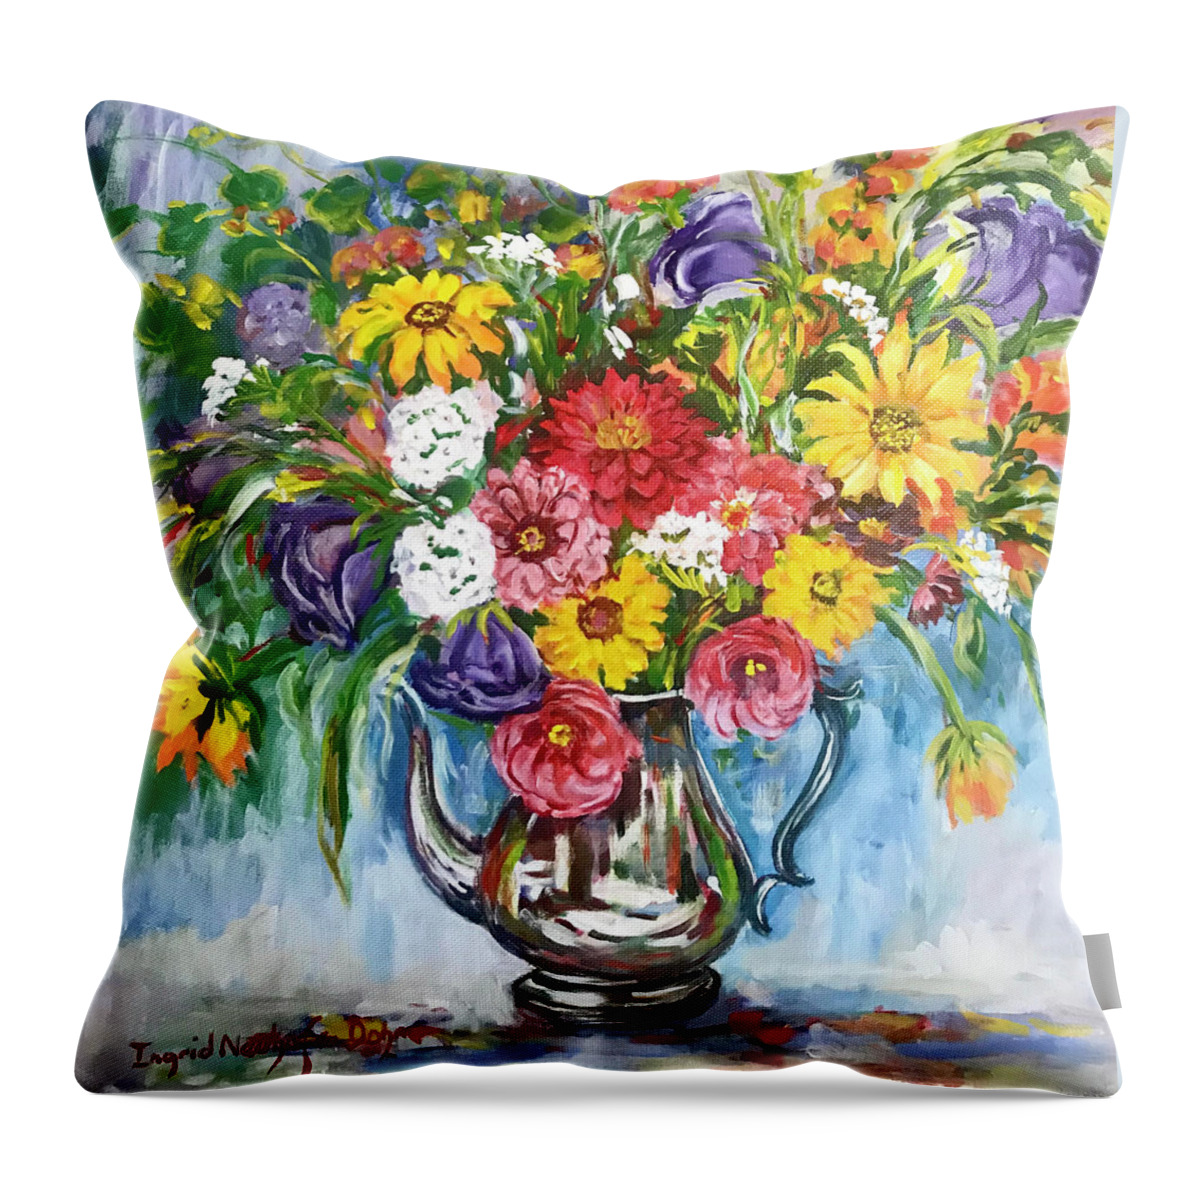 Flowers Throw Pillow featuring the painting Arrangement by Ingrid Dohm